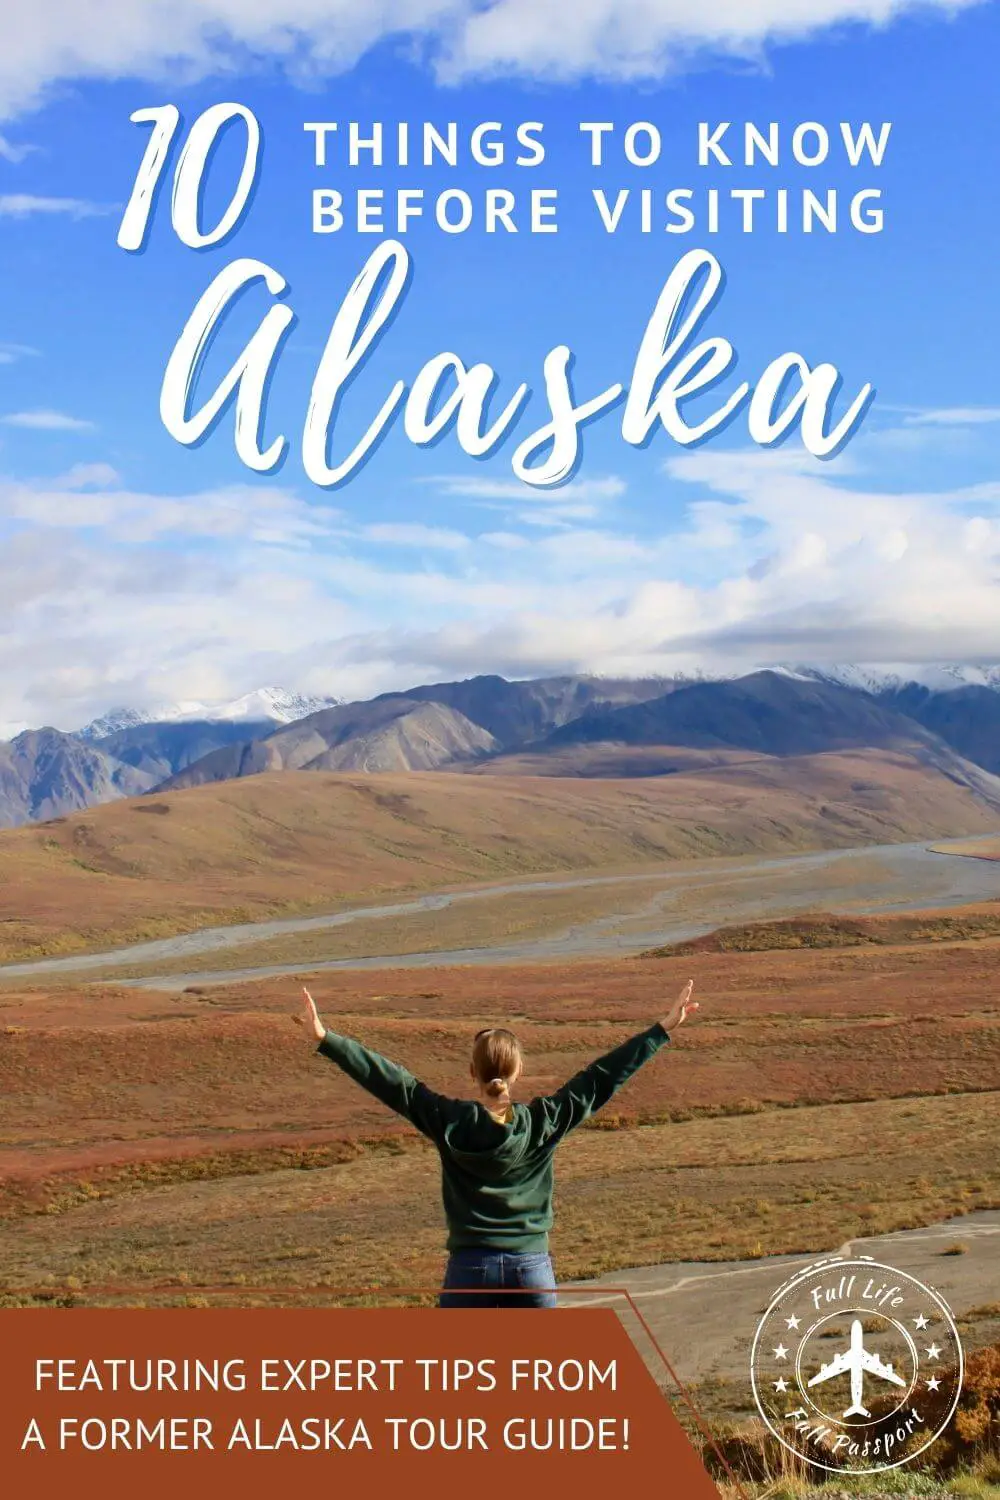 10 Things to Know Before Visiting Alaska